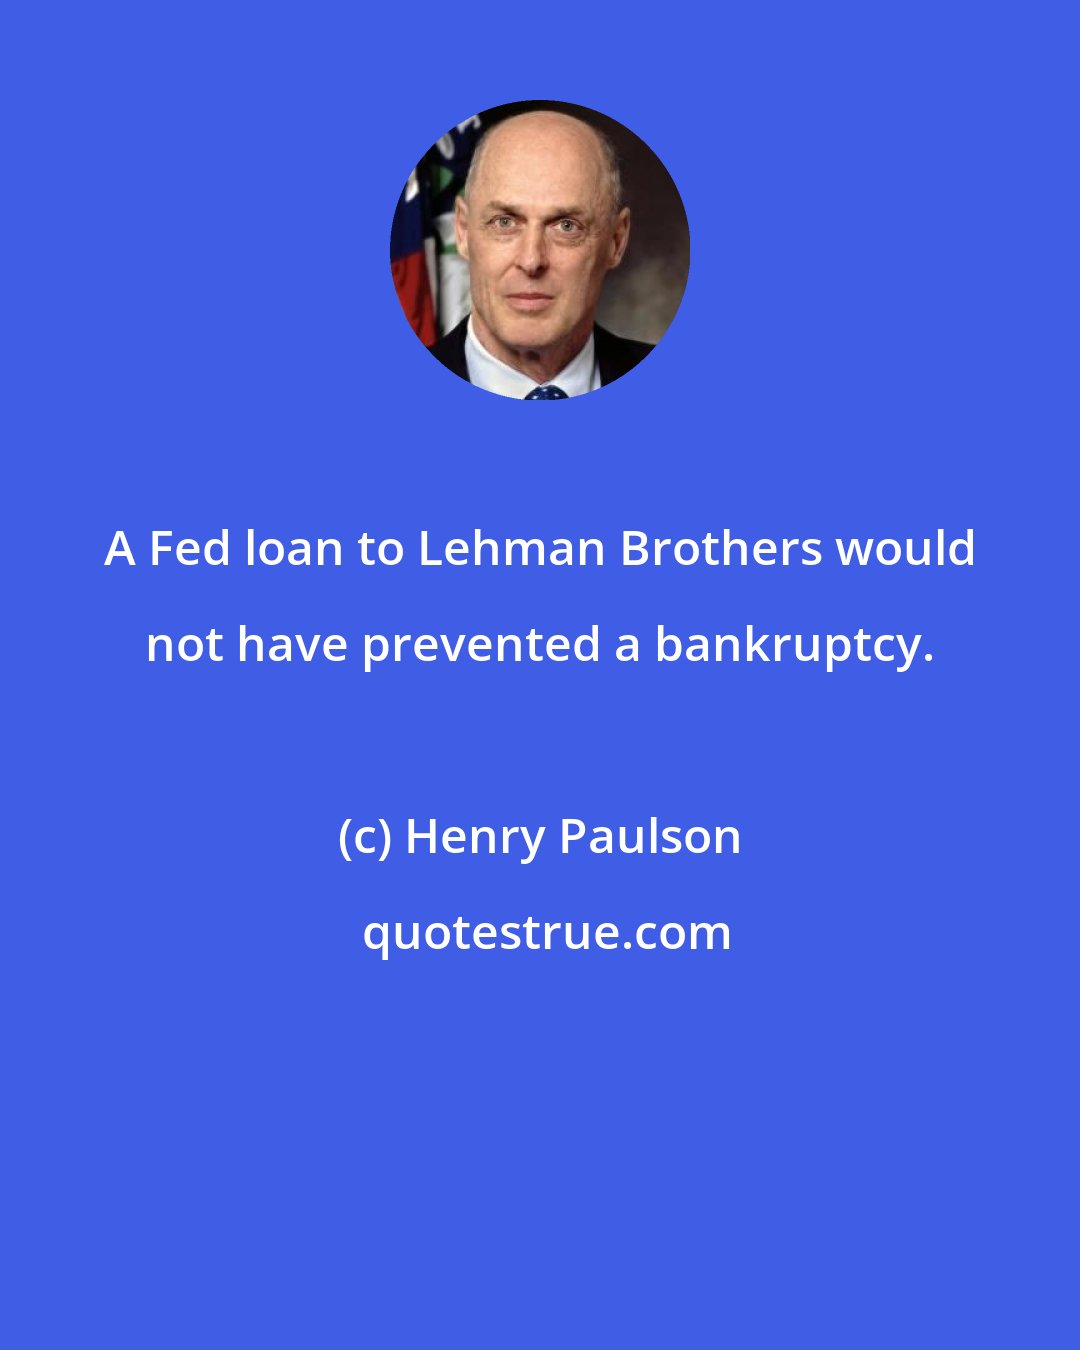 Henry Paulson: A Fed loan to Lehman Brothers would not have prevented a bankruptcy.